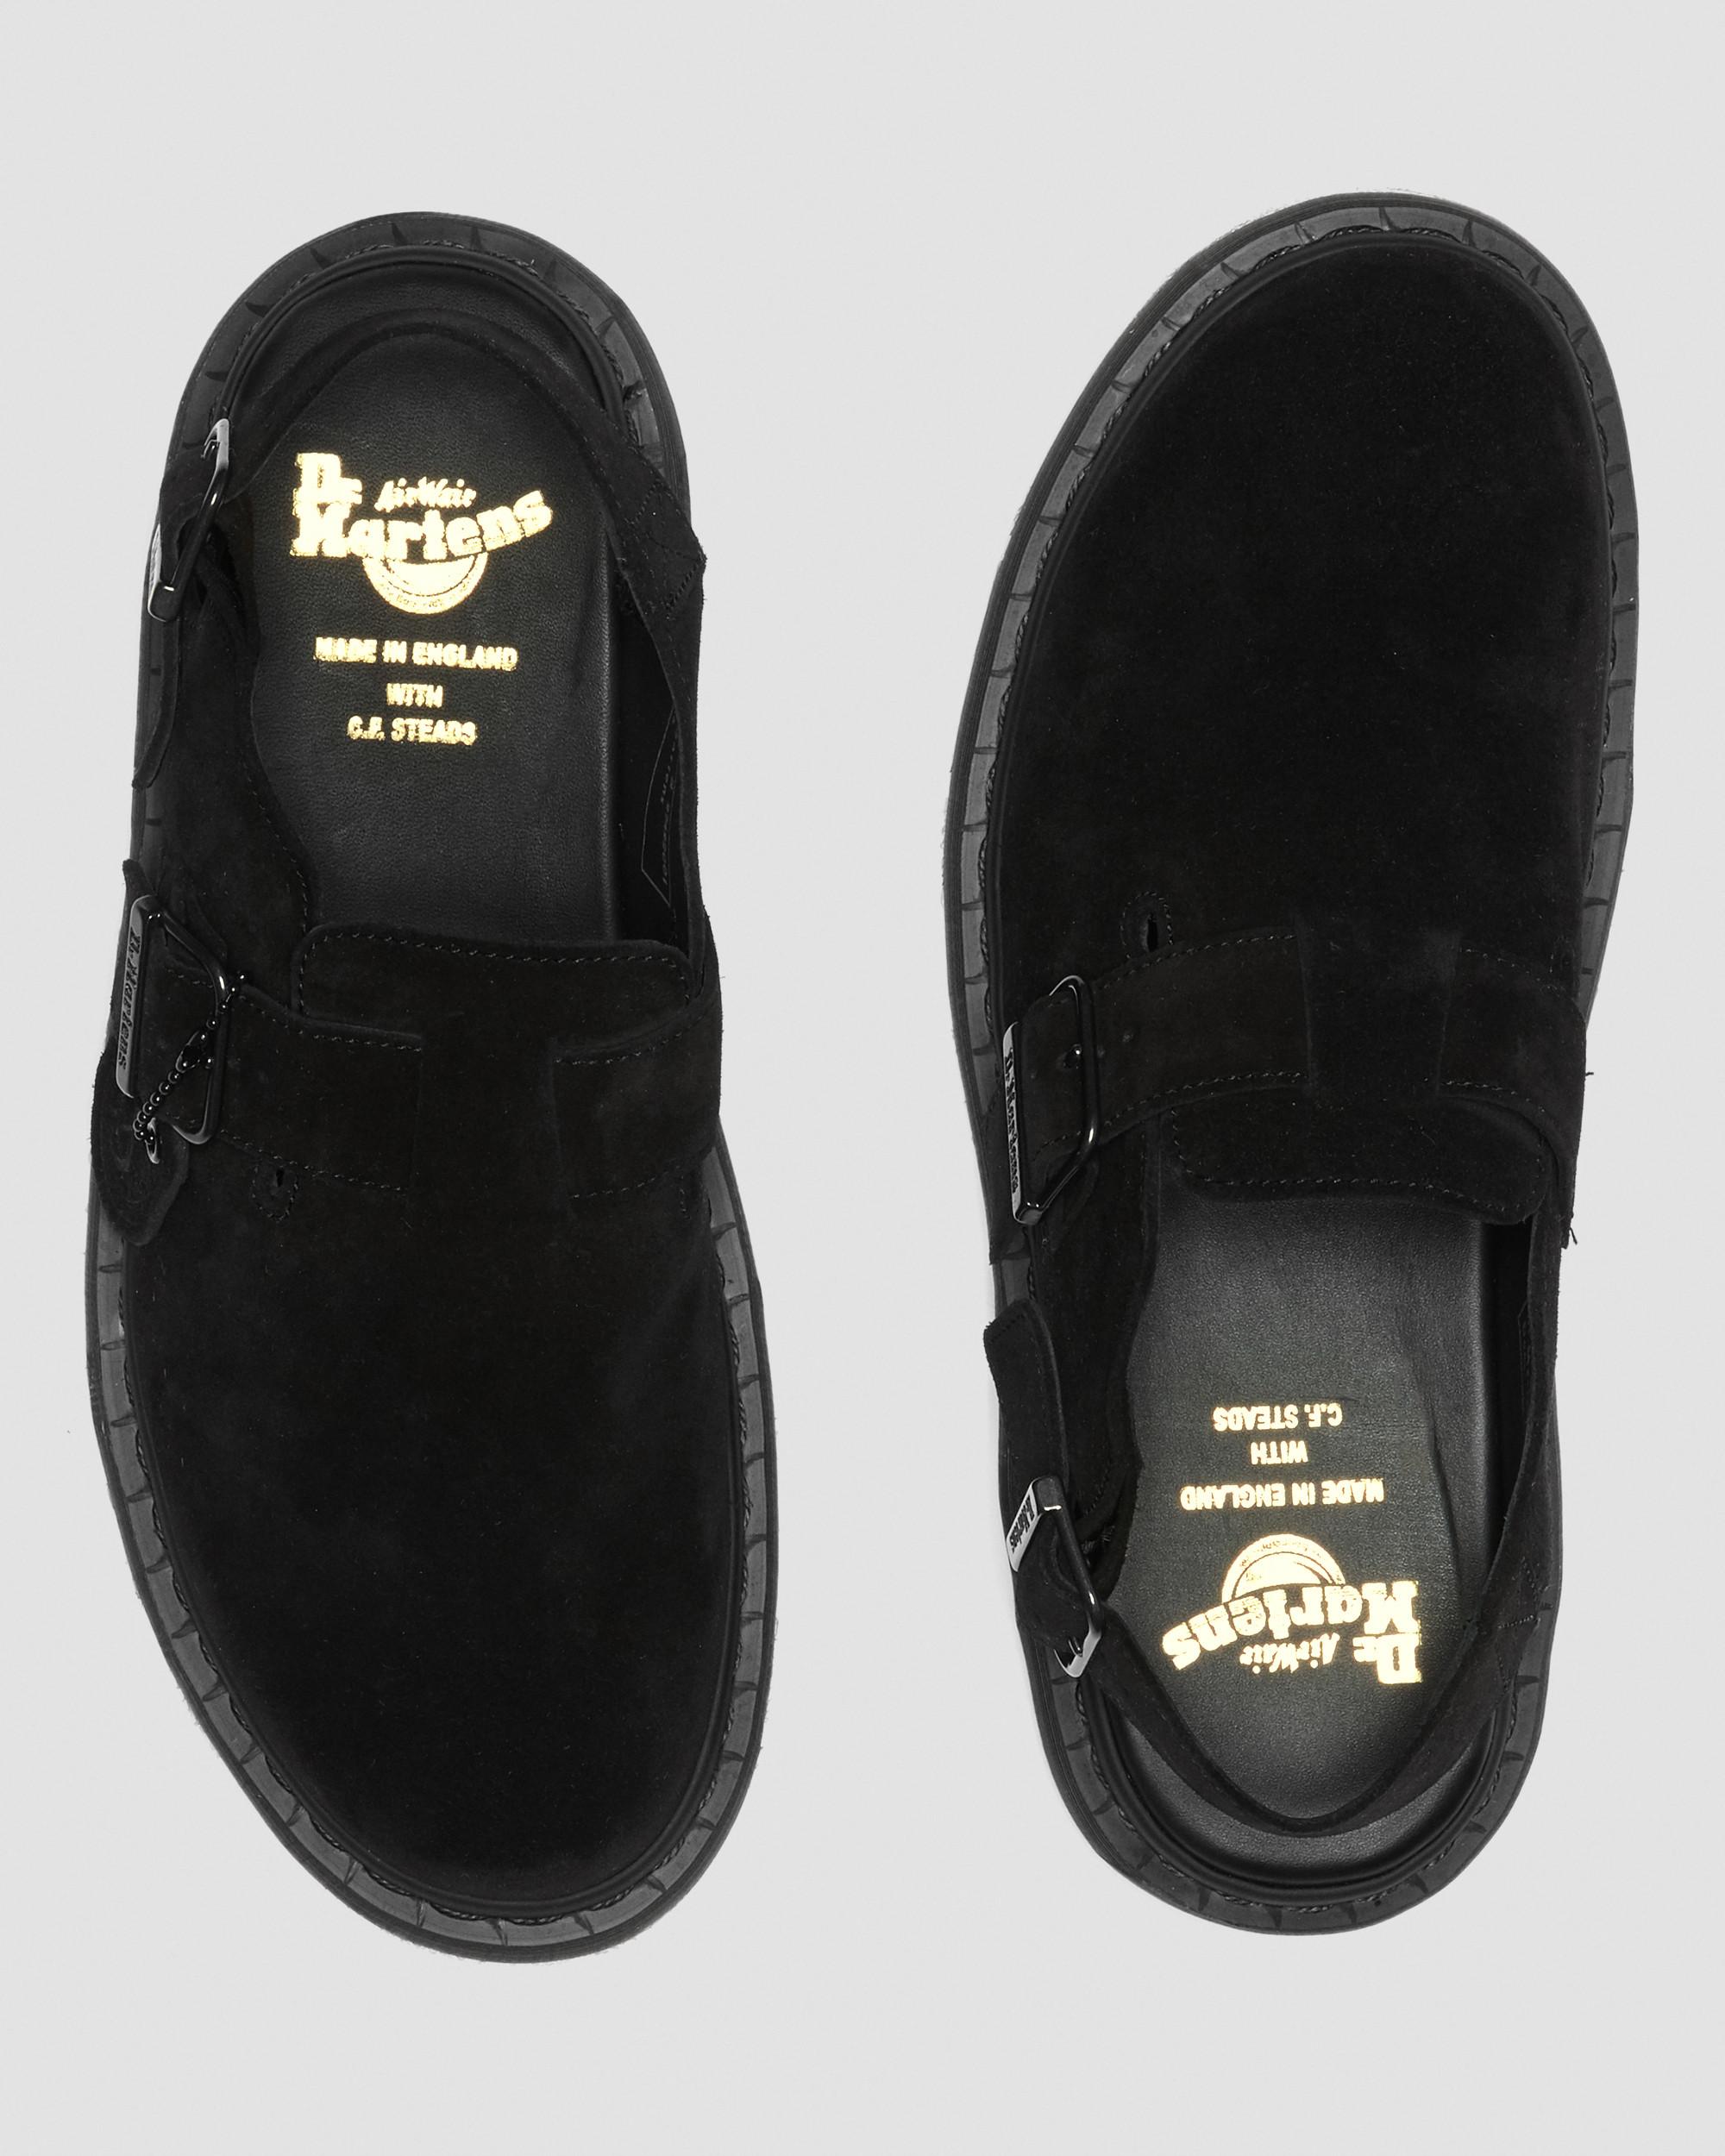 Jorge Made In England Suede MulesJorge Made In England Suede Mules Dr. Martens